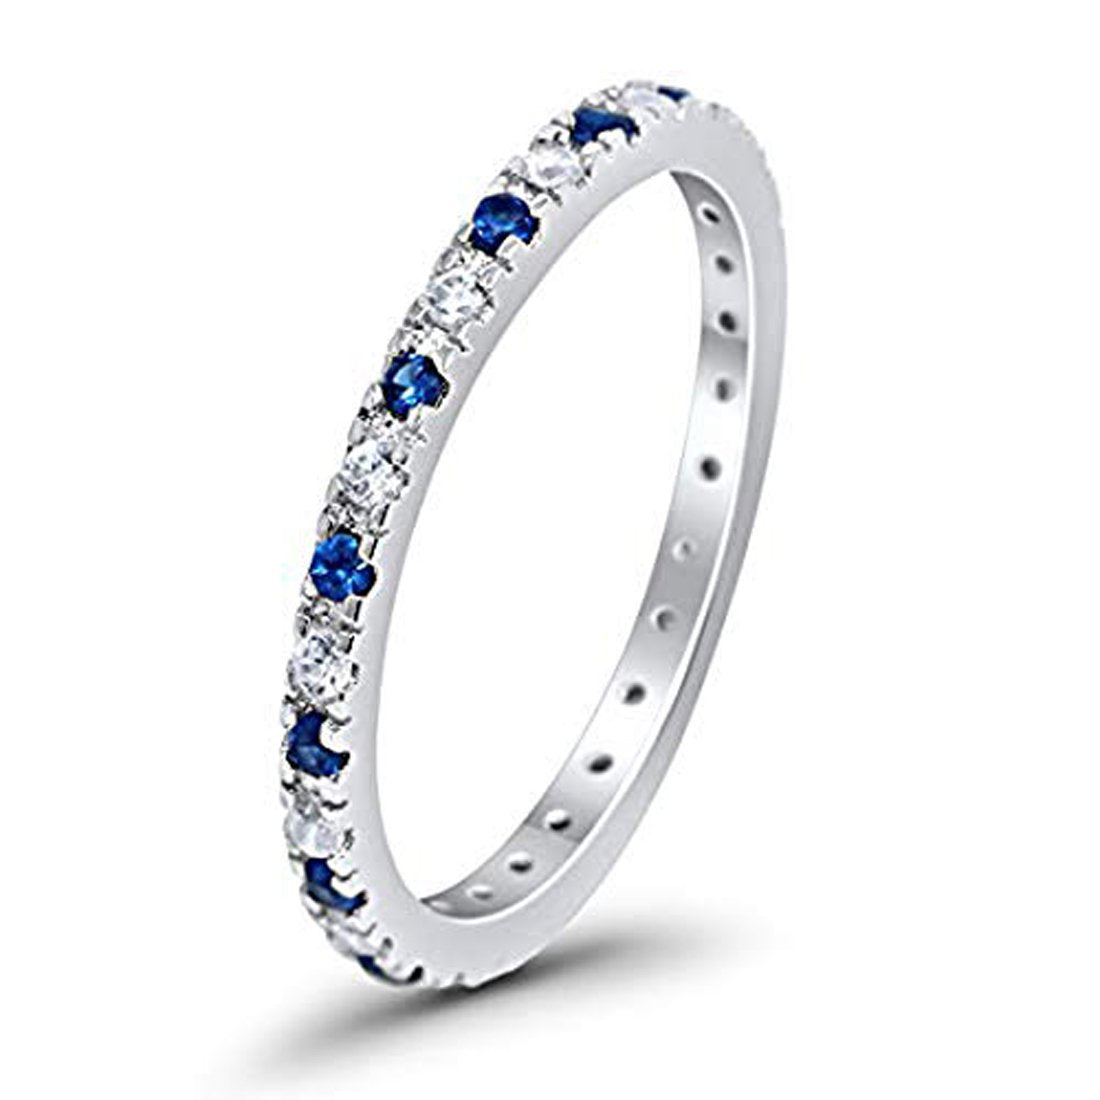 Full Eternity Wedding Band Design Simulated Blue Sapphire CZ 925 Sterling Silver